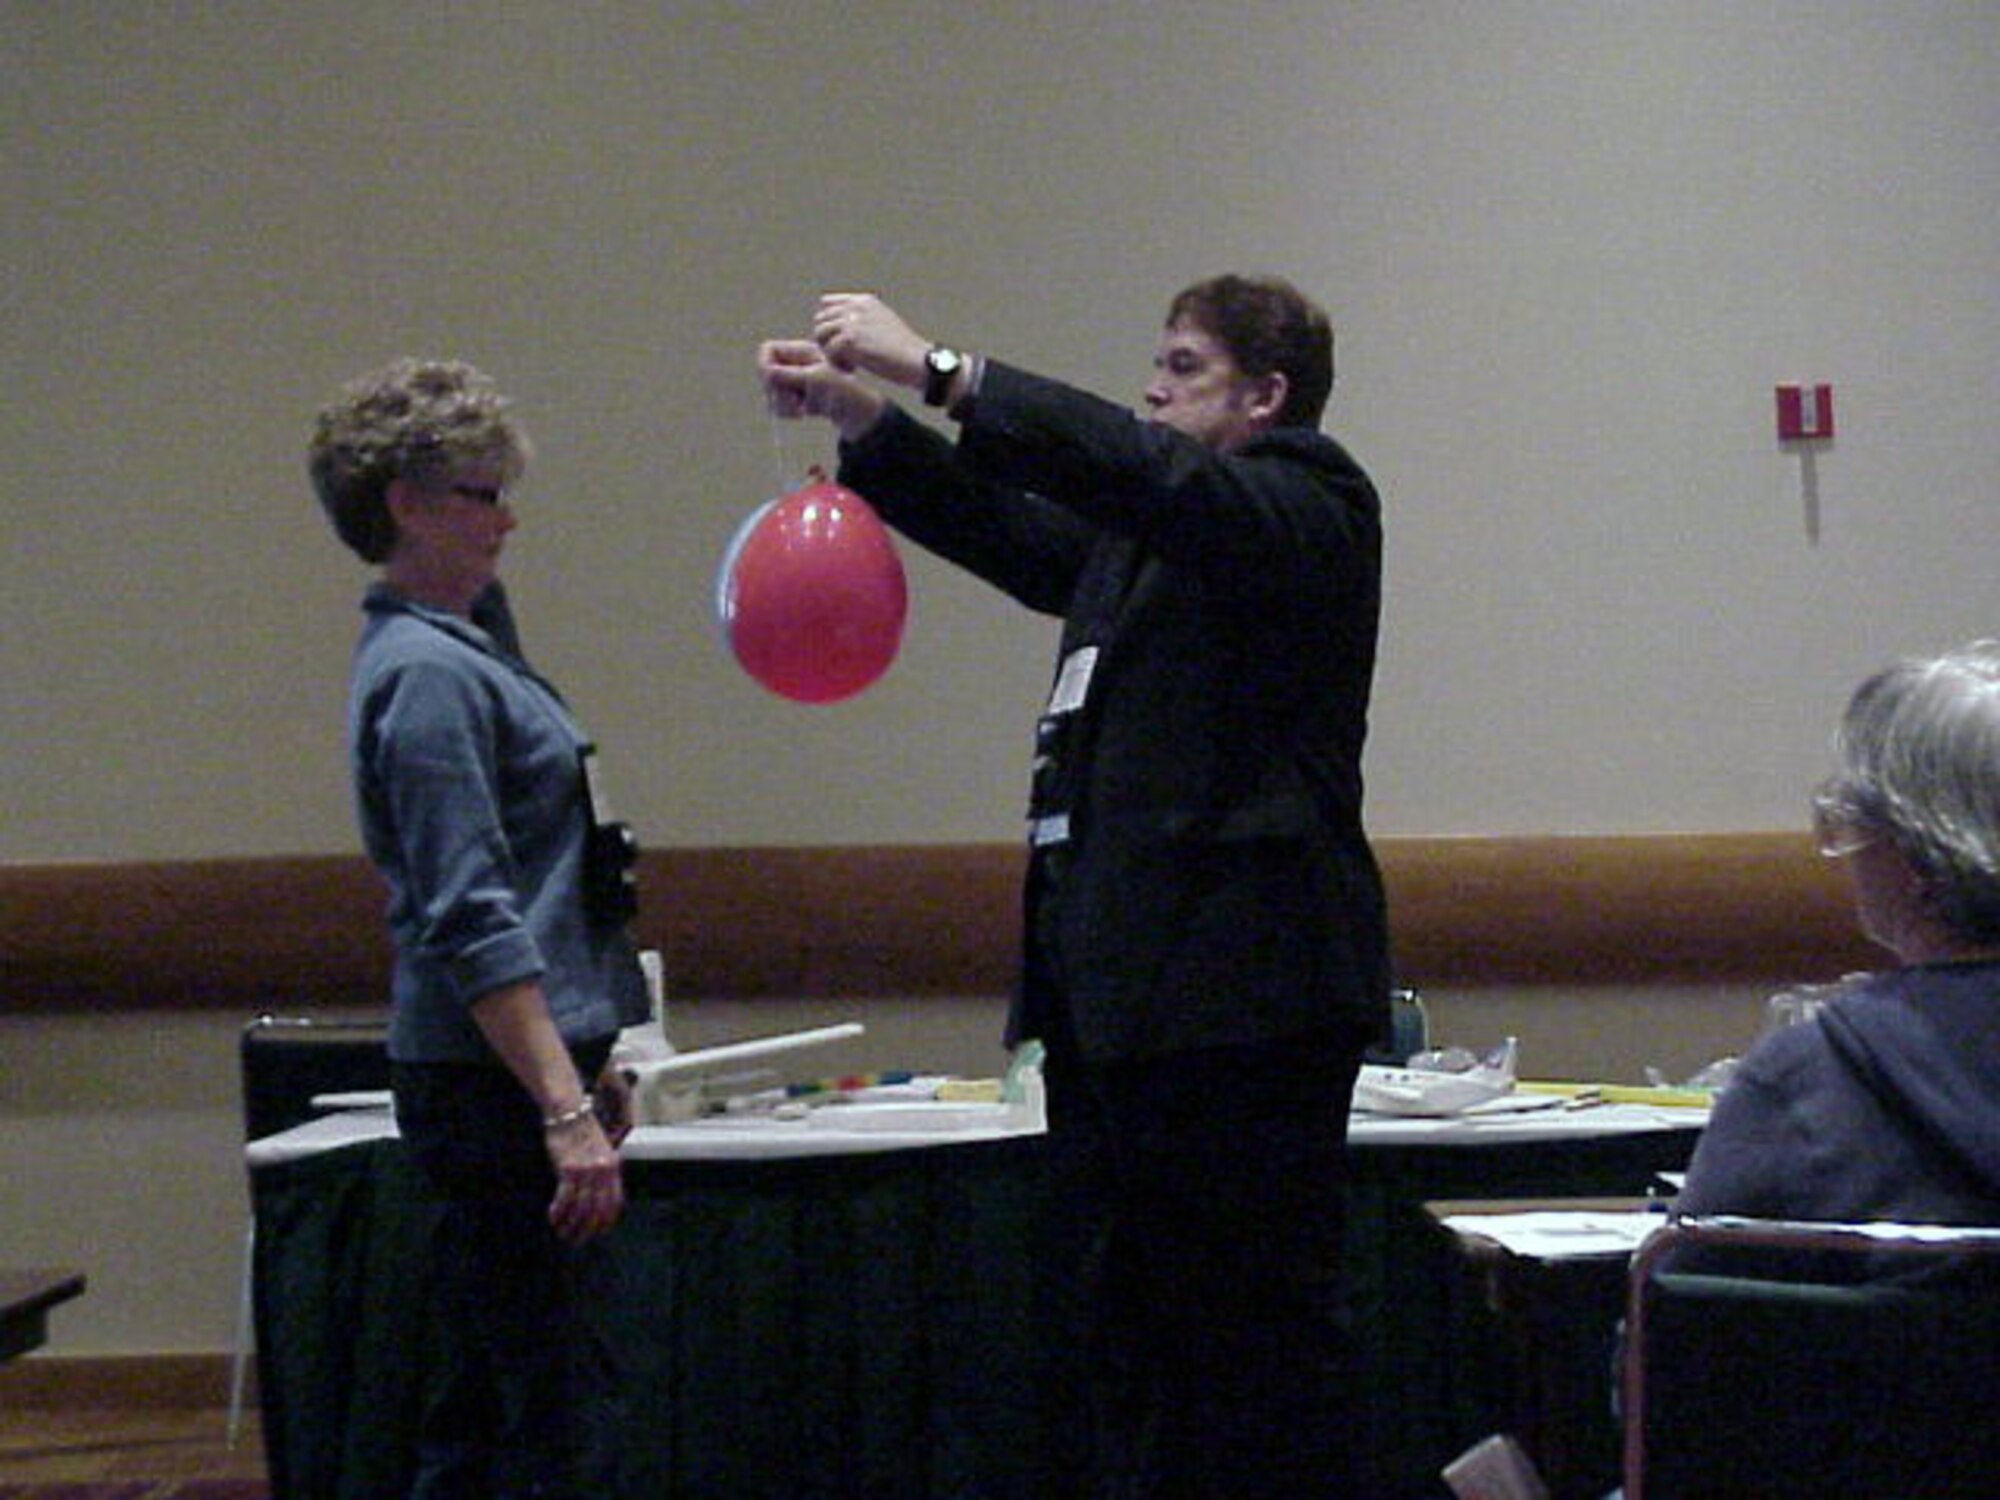 Howard Walker presents “Fun with Flight” to teachers from across the nation during the National Science Teachers Association Conference in Indianapolis. (U.S. Air Force photo)